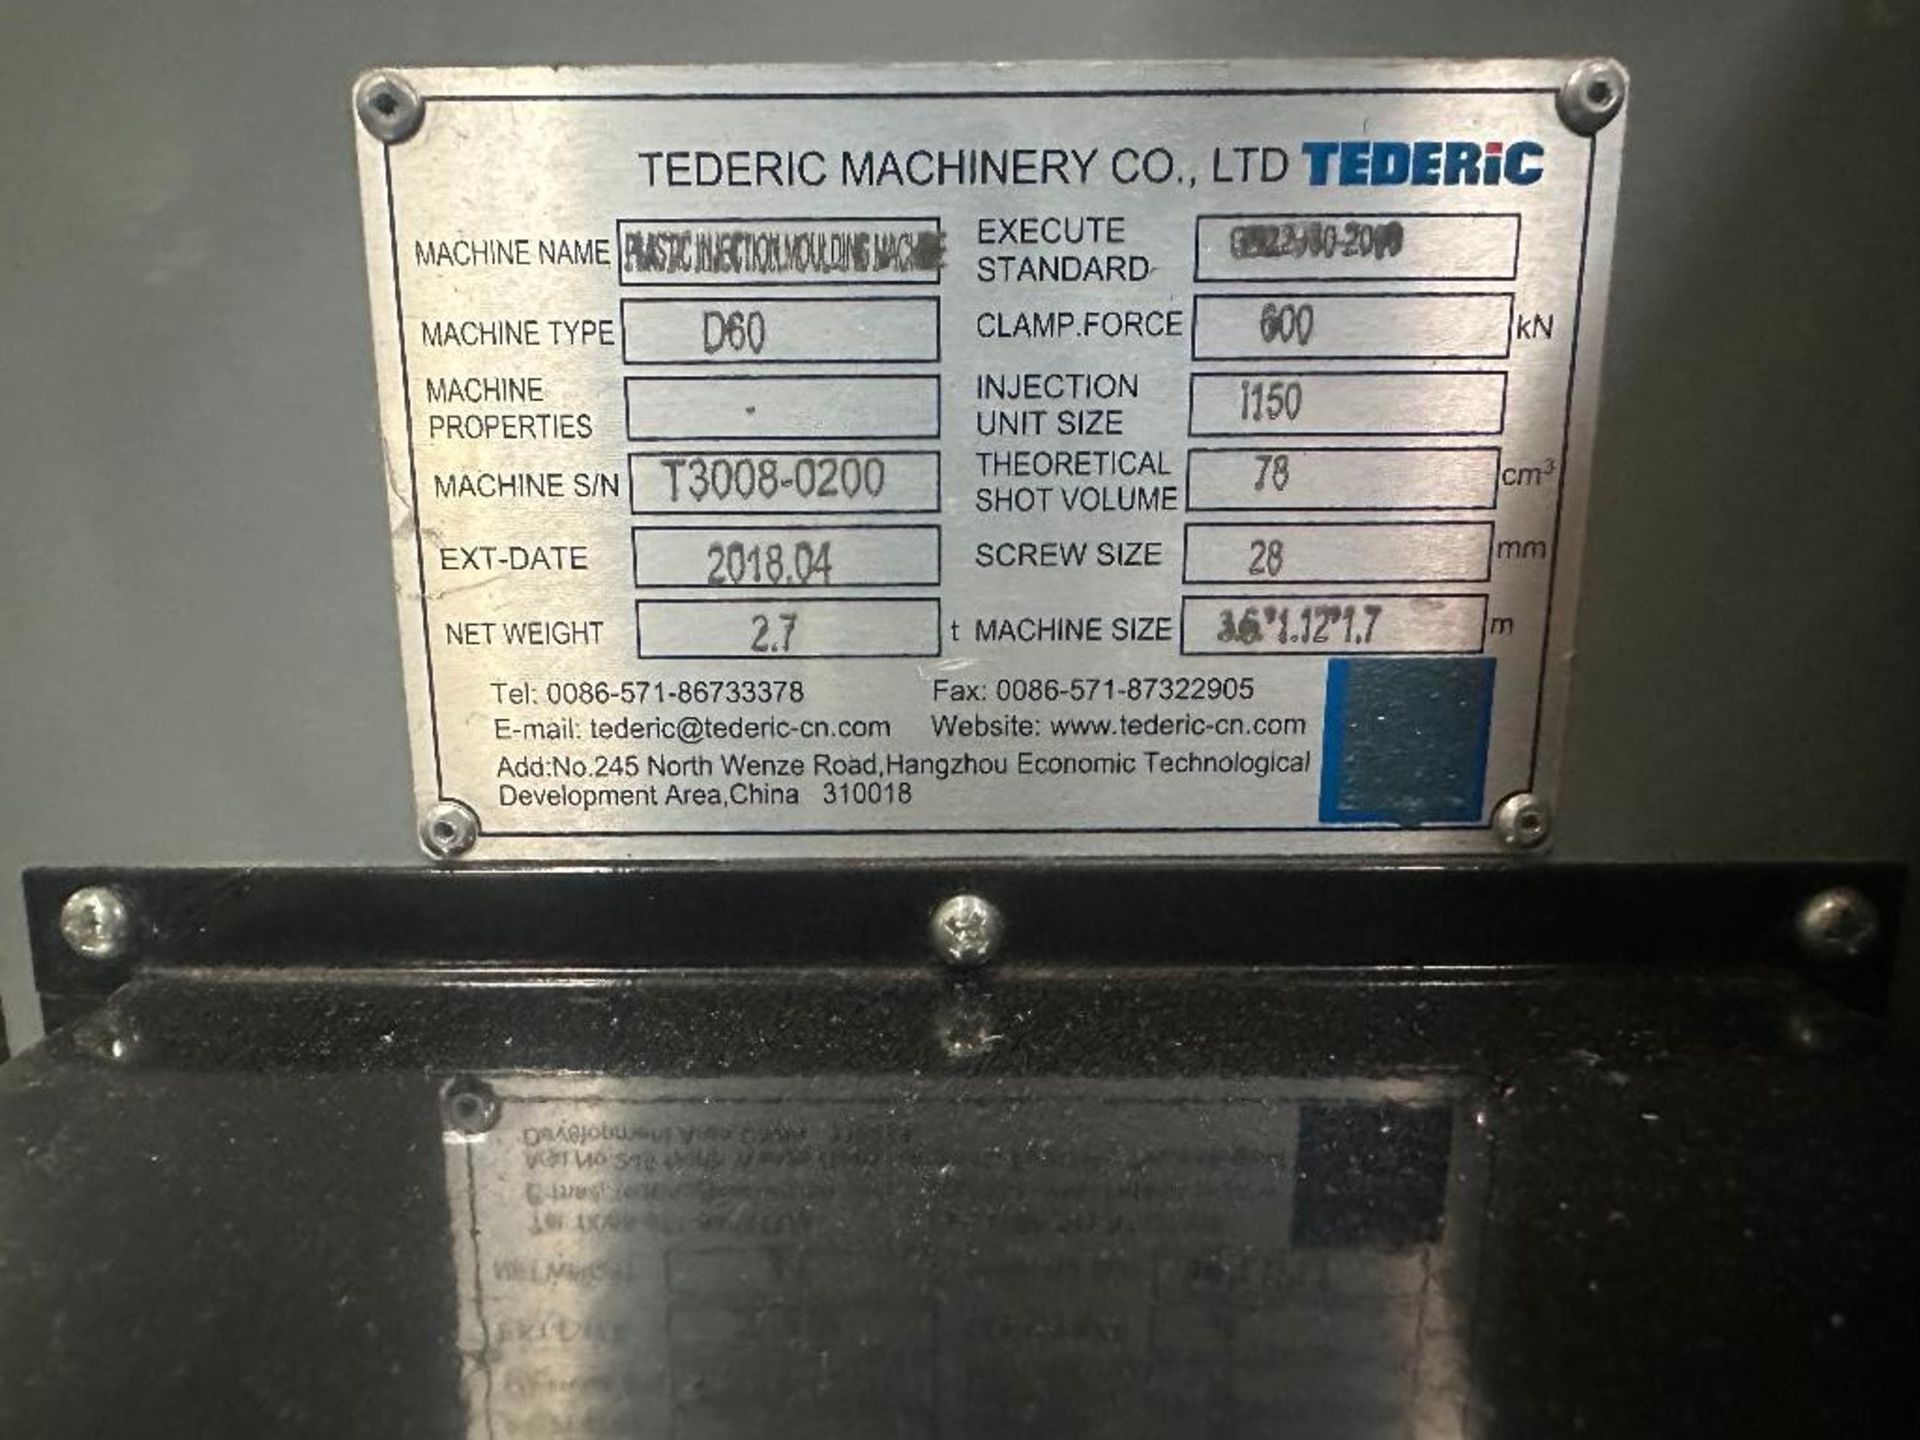 66 Ton Tederic D60 Plastic Injection Molder, Keba 12000 Control, s/n T3008-0200, New 2018 - Image 16 of 17